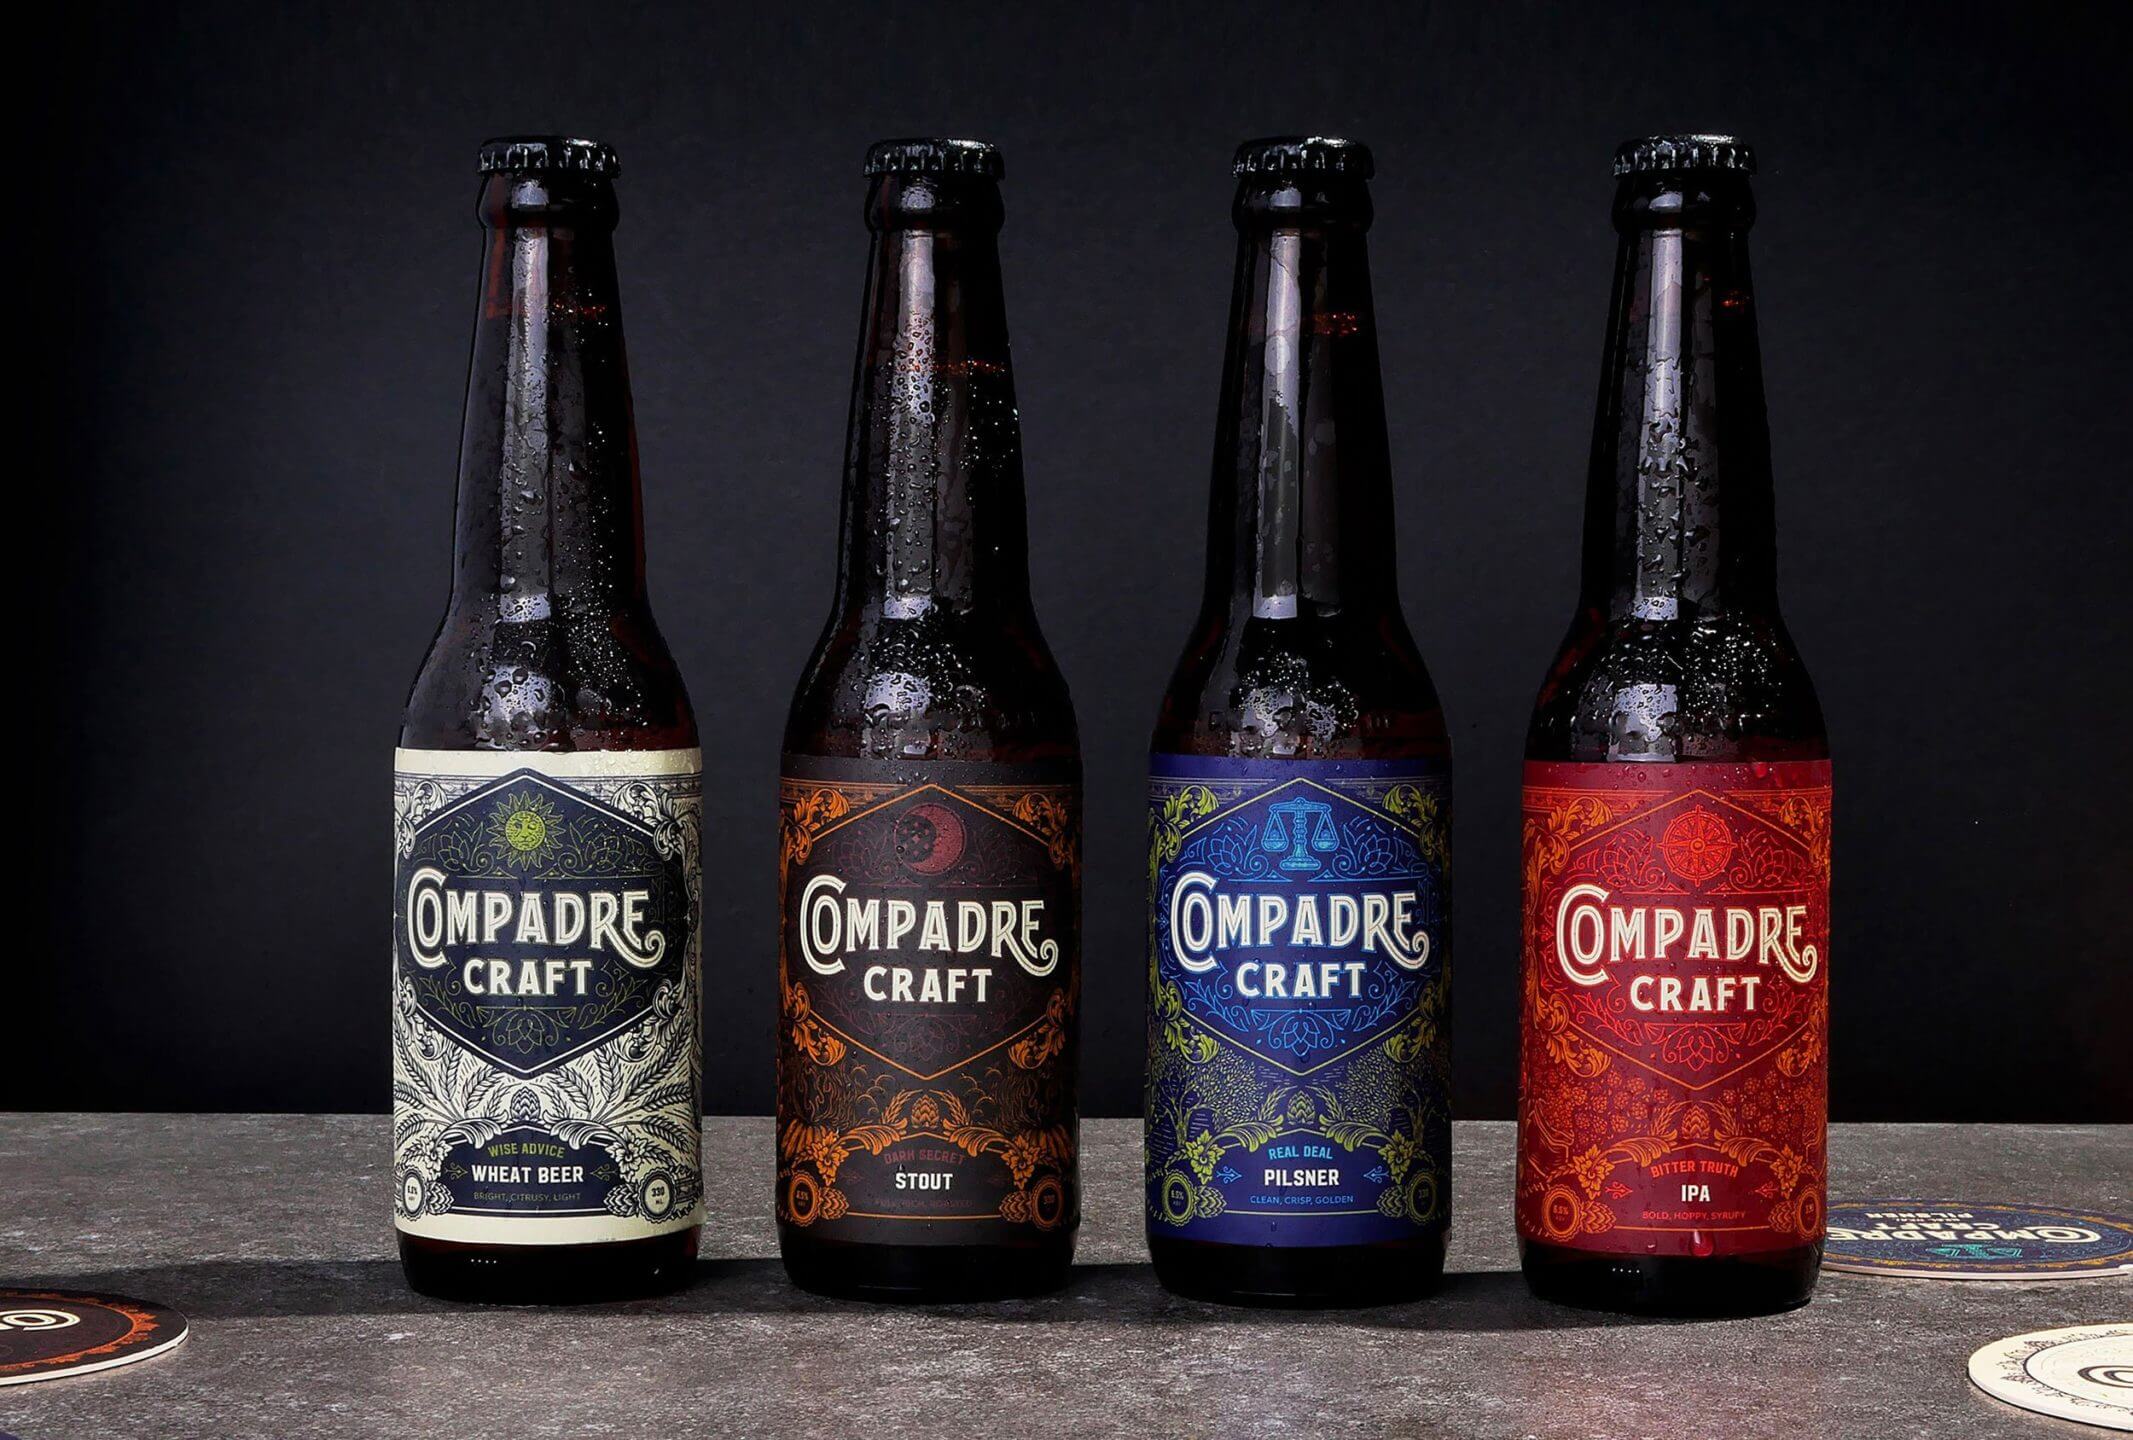 Compadre Craft Beers all together— wheat beer, stout, pilsner, ipa